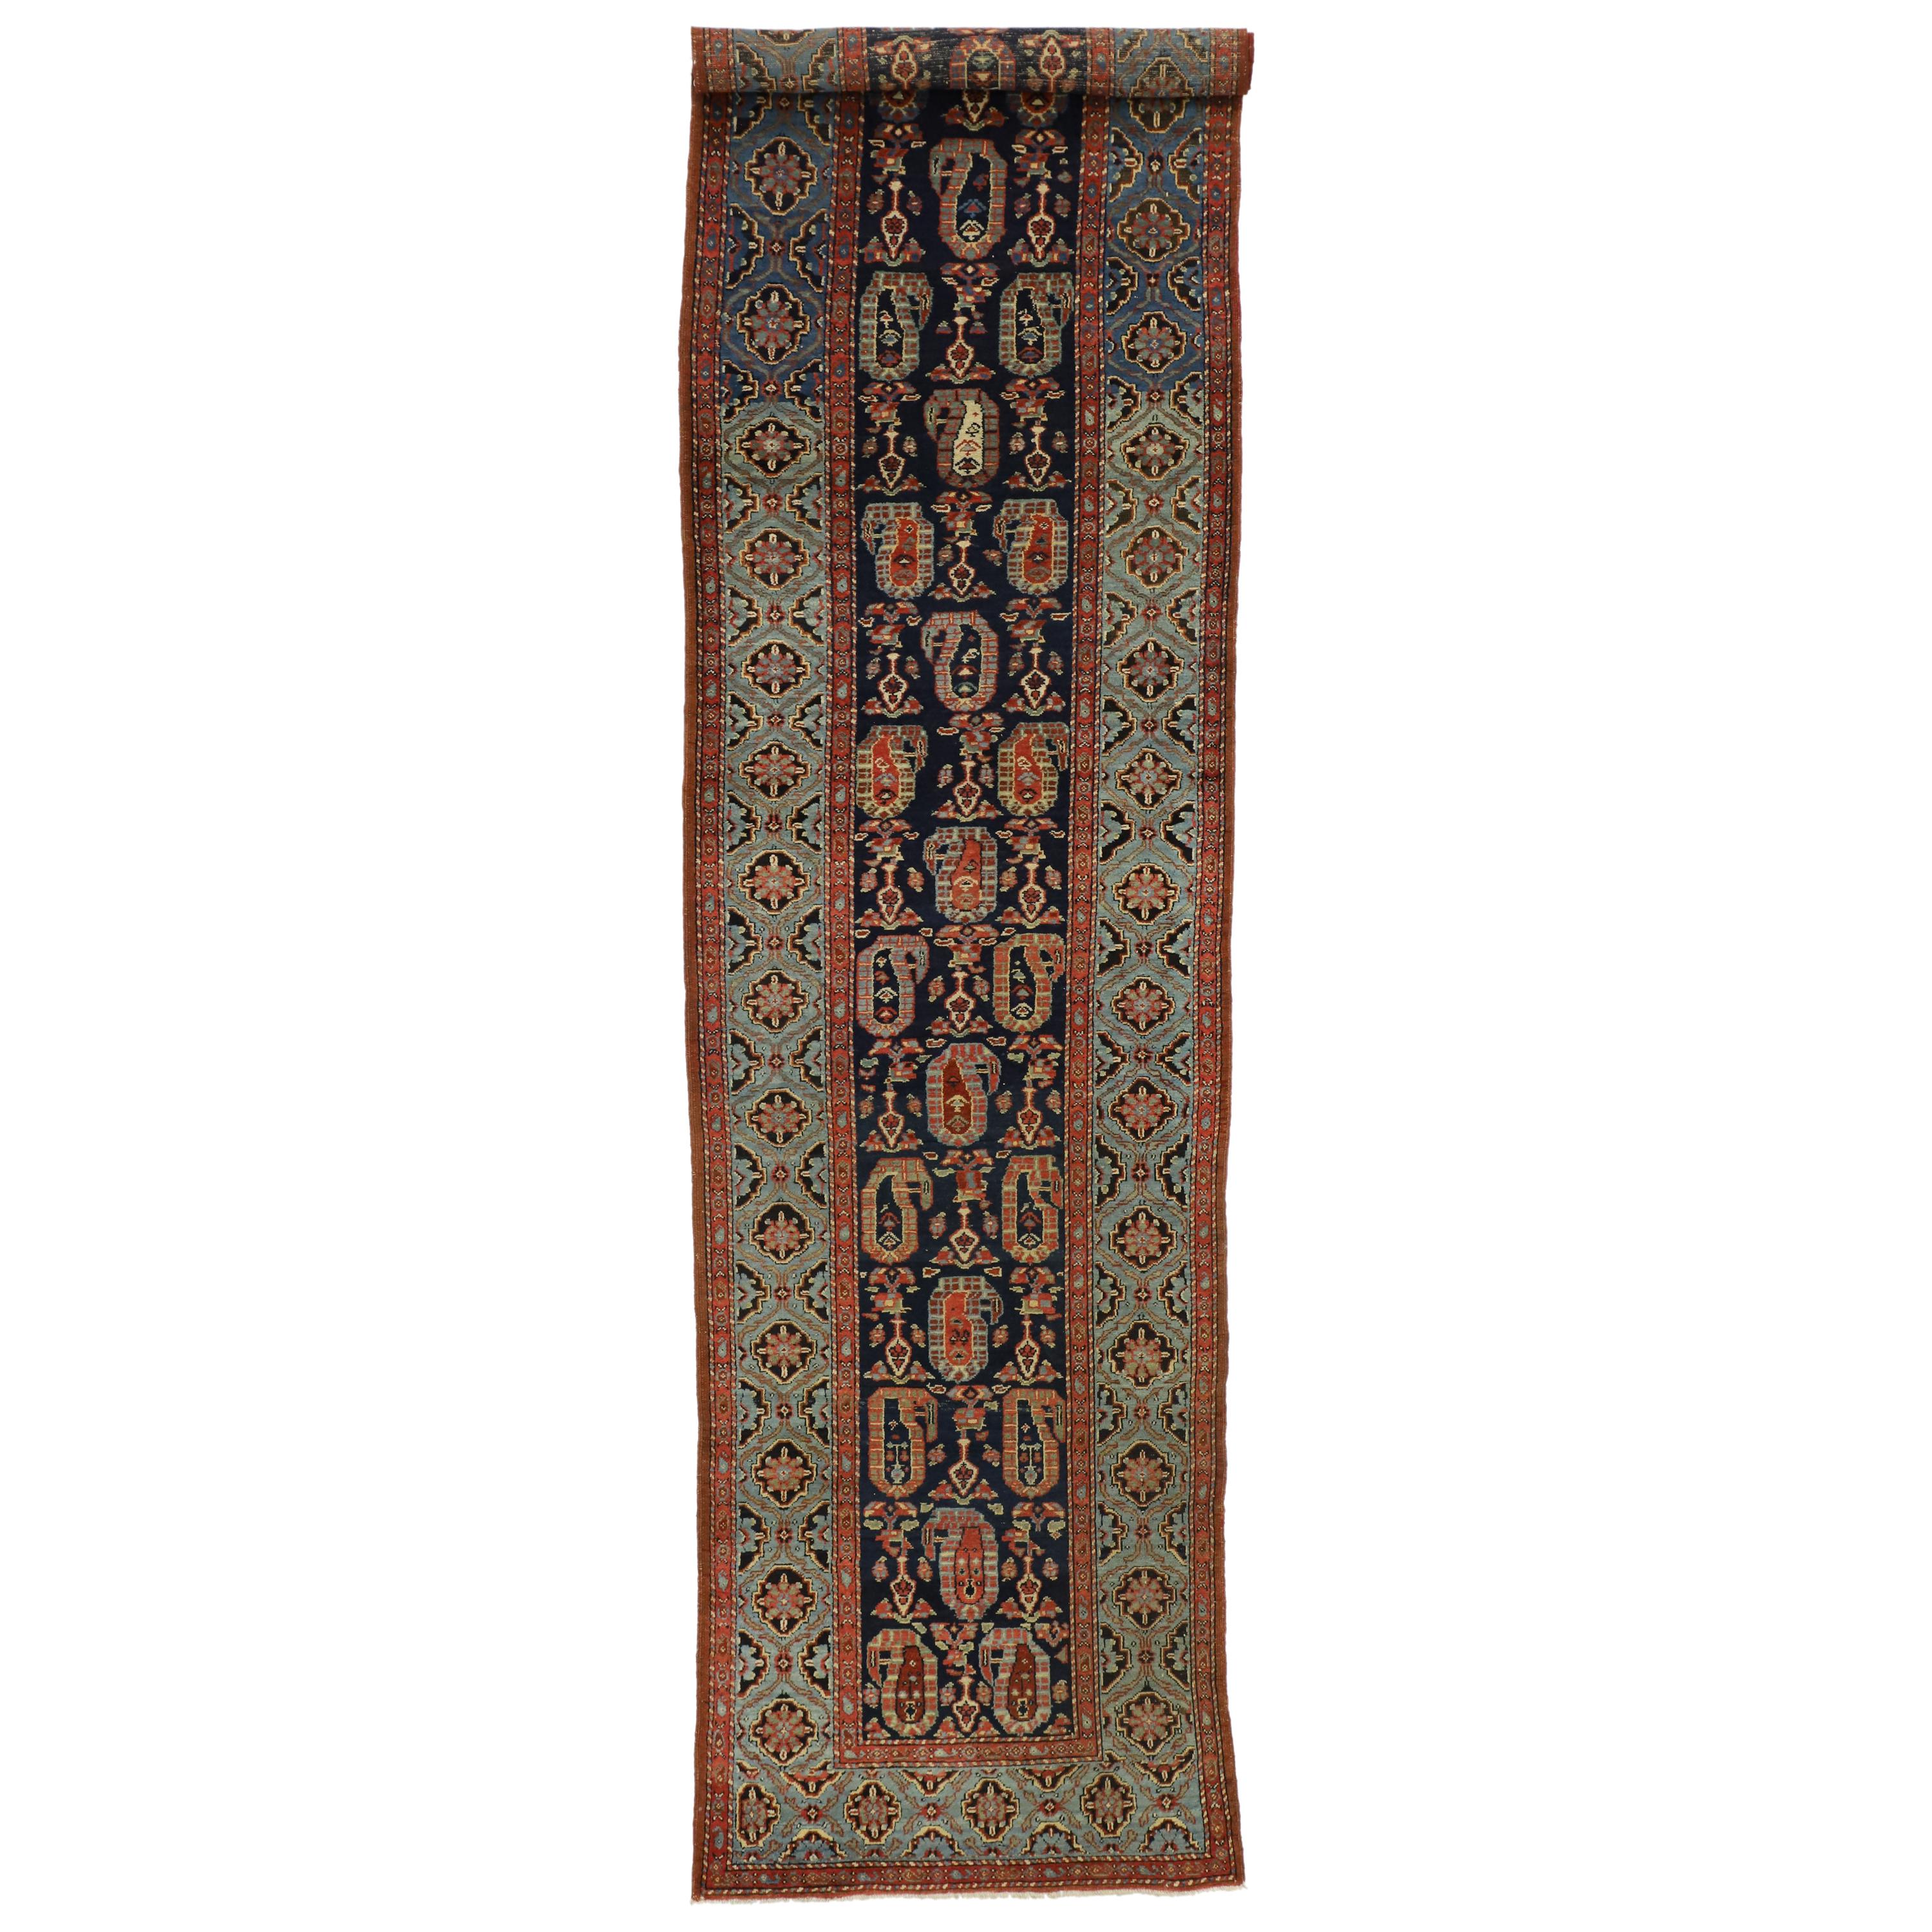 Antique Persian Malayer Hallway Runner with Modern Parisian Style